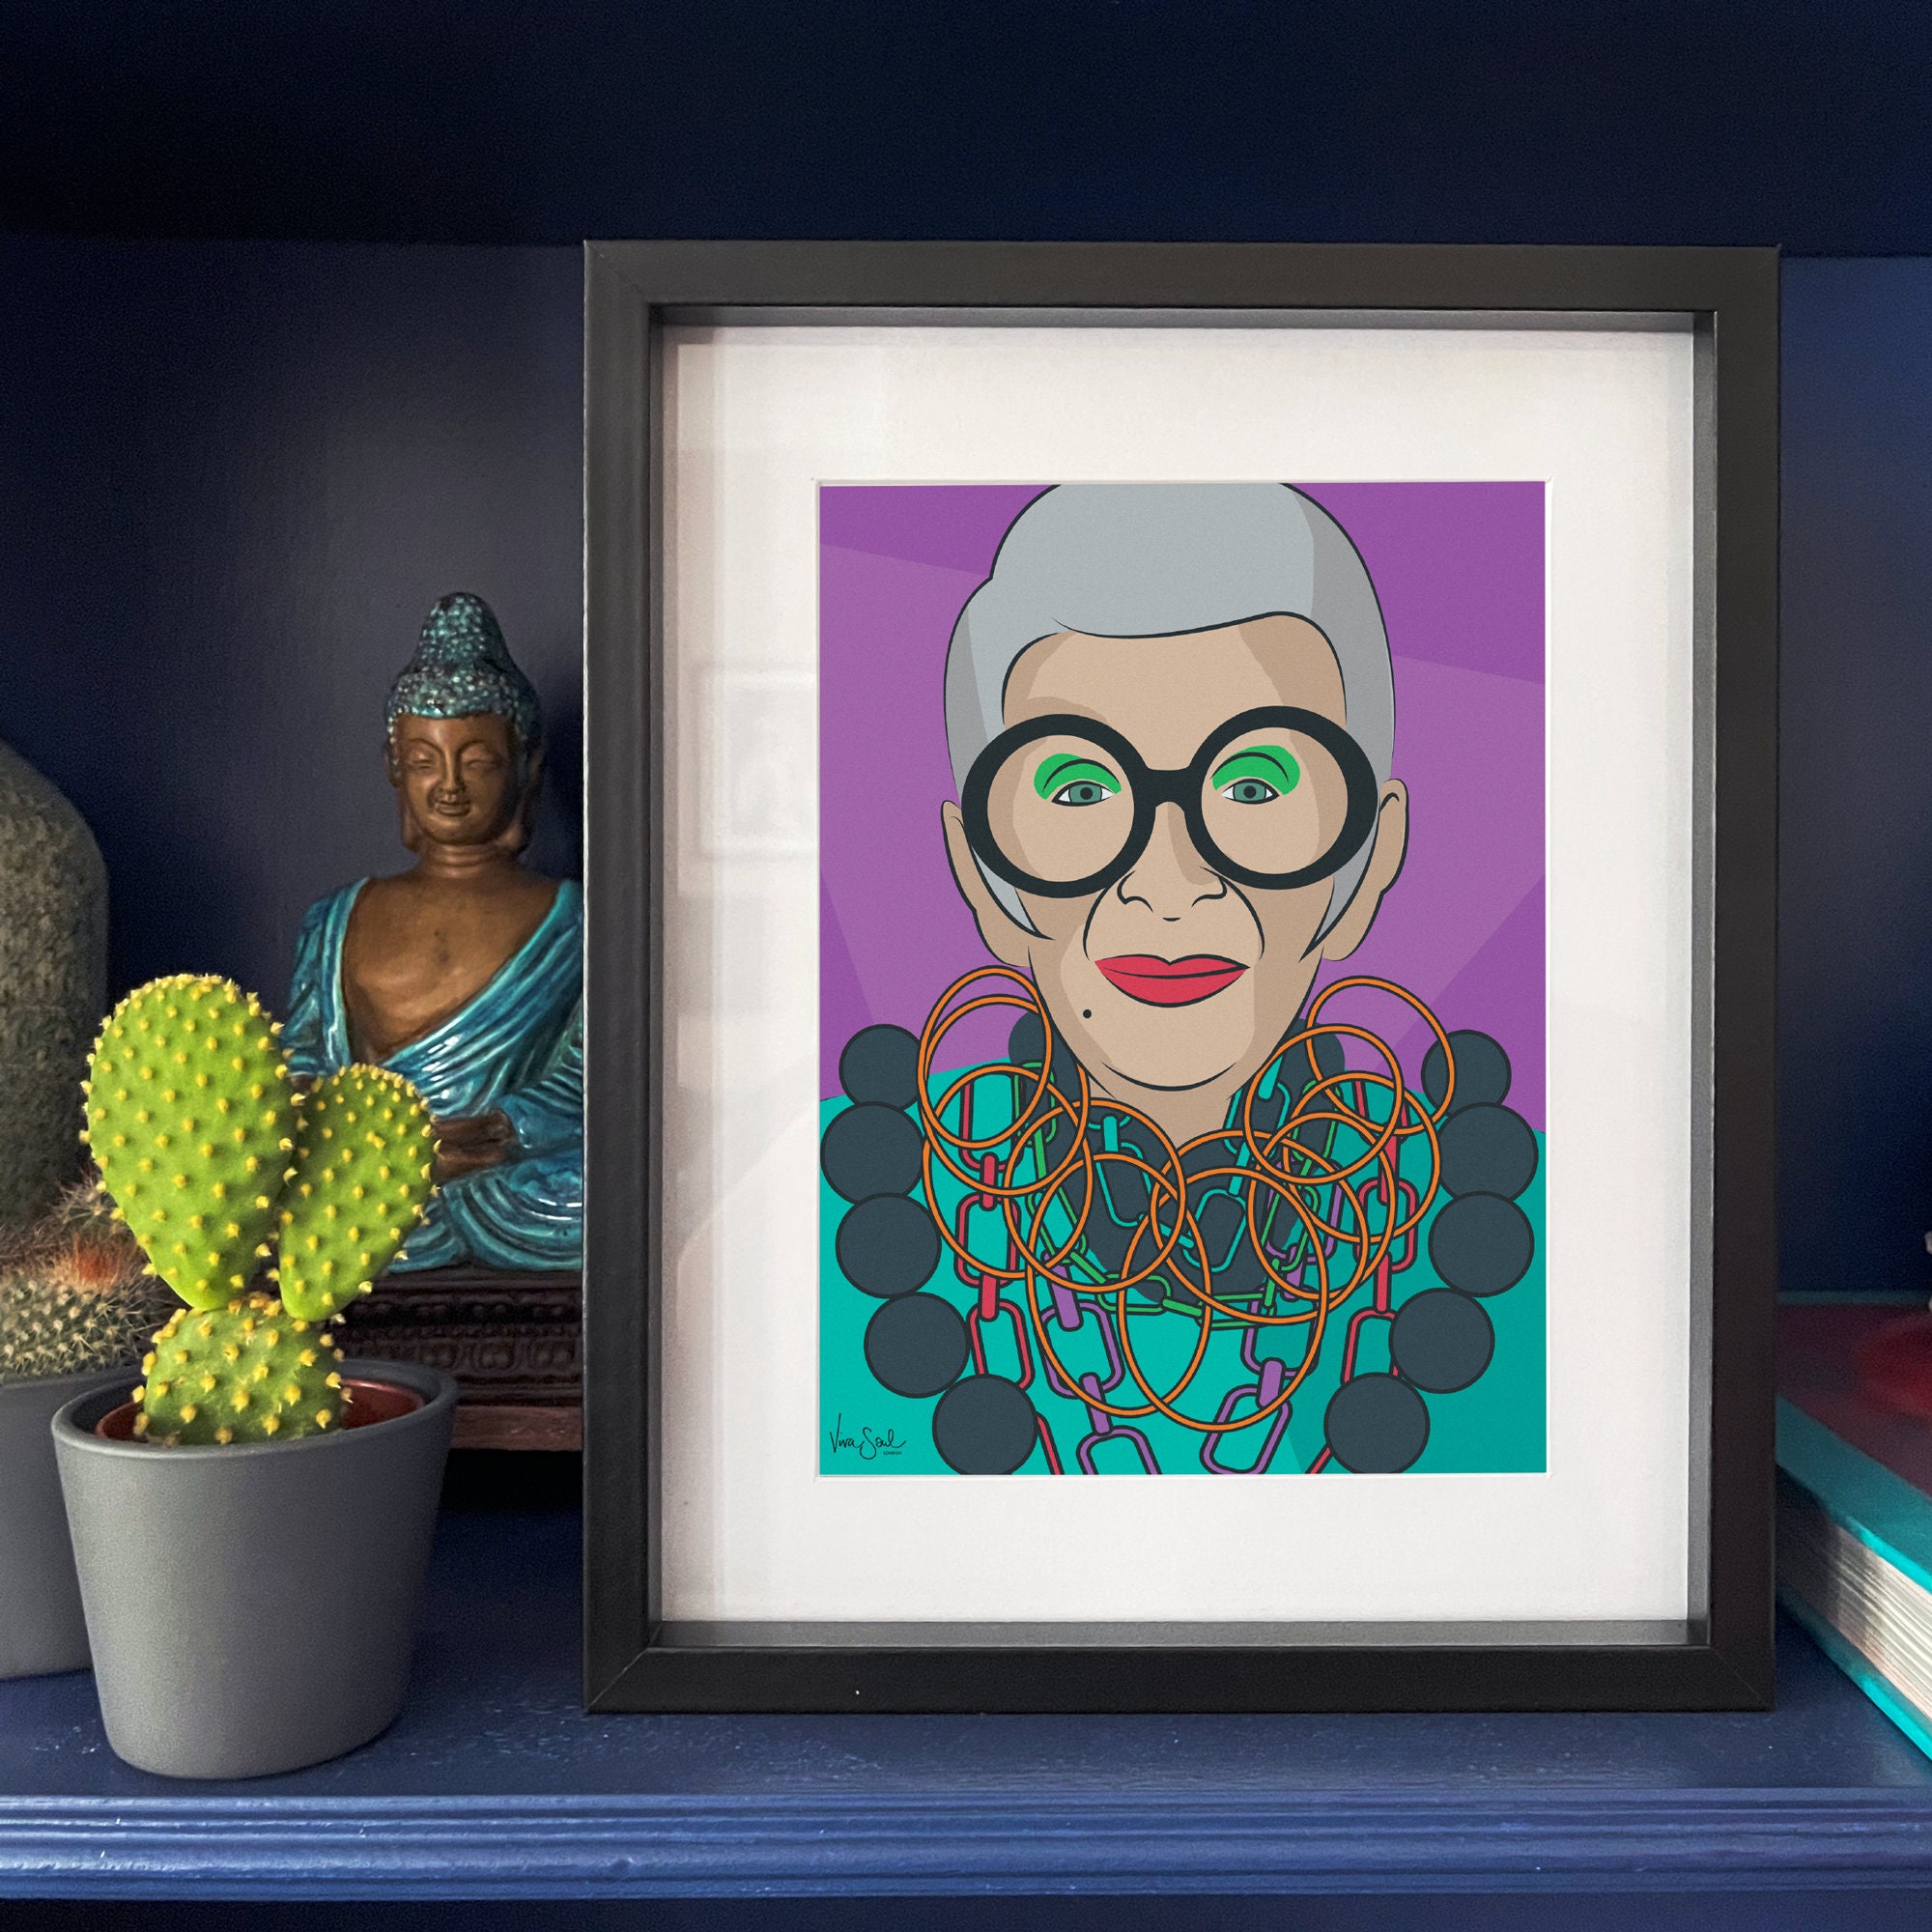 Iris Apfel Quote: “You only have one trip. You might as well enjoy it.”